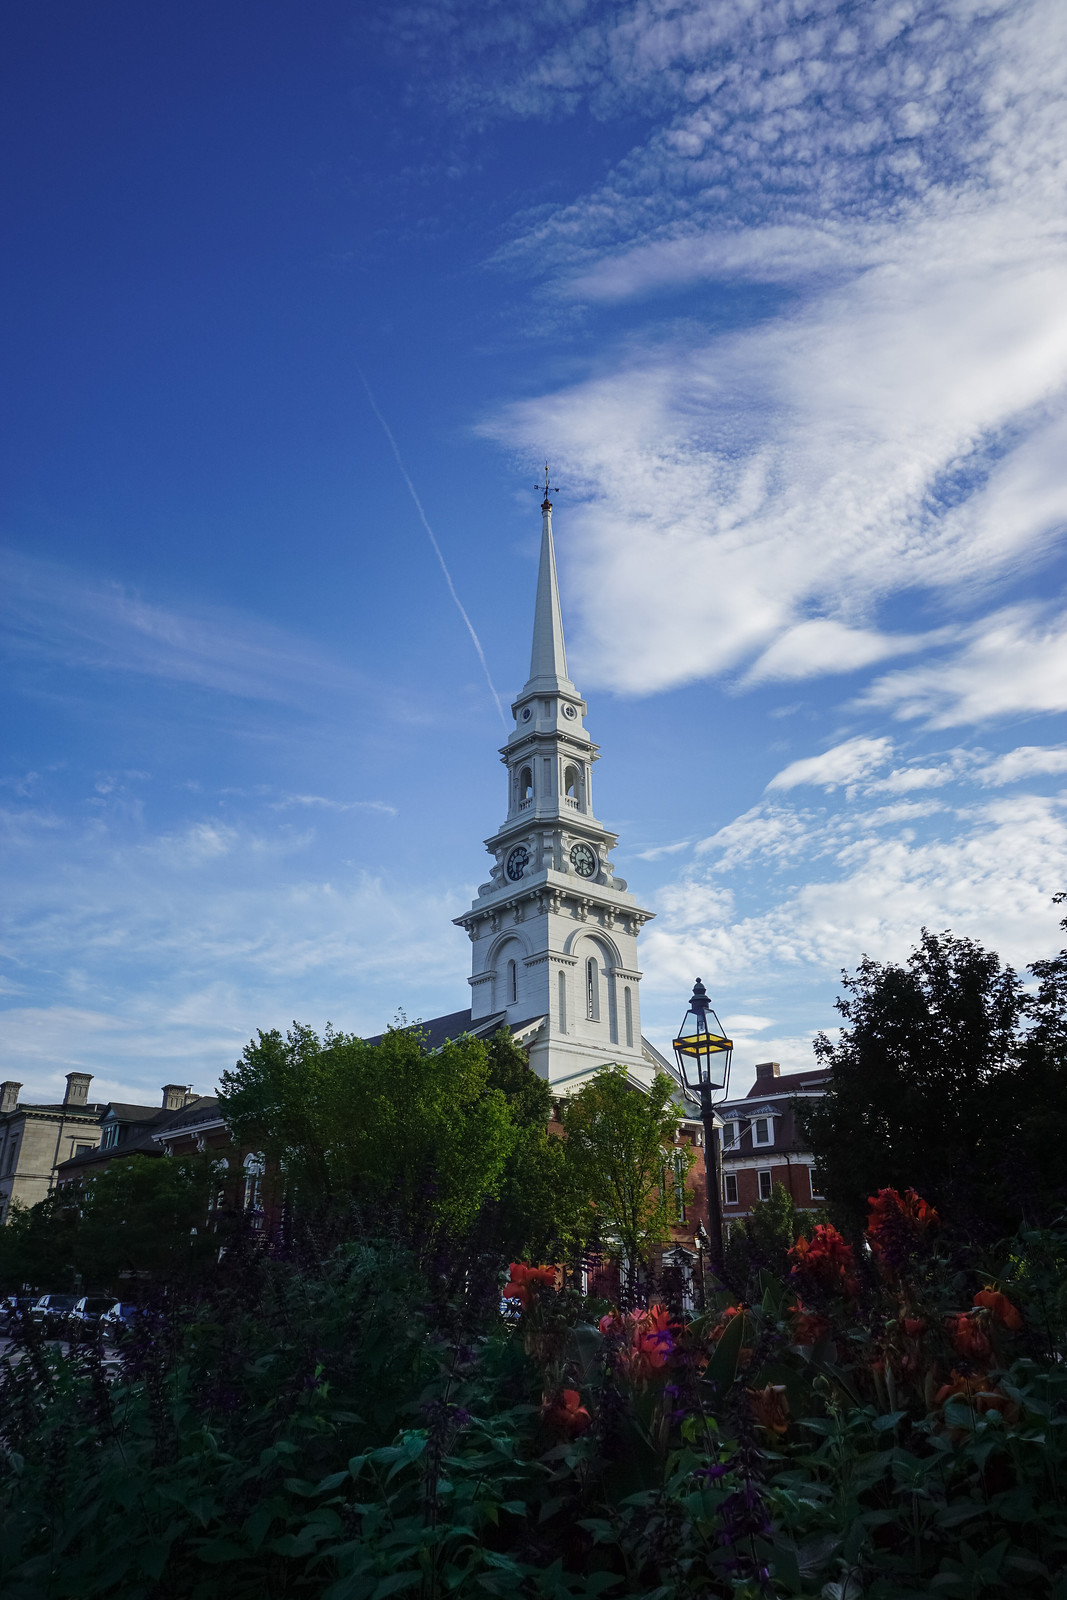 Church Steeple in Portsmouth, New Hampshire | New England Road Trip Itinerary - New England Road Trip - The Ultimate 7 Day Itinerary - The Perfect Summer New England Road Trip Itinerary